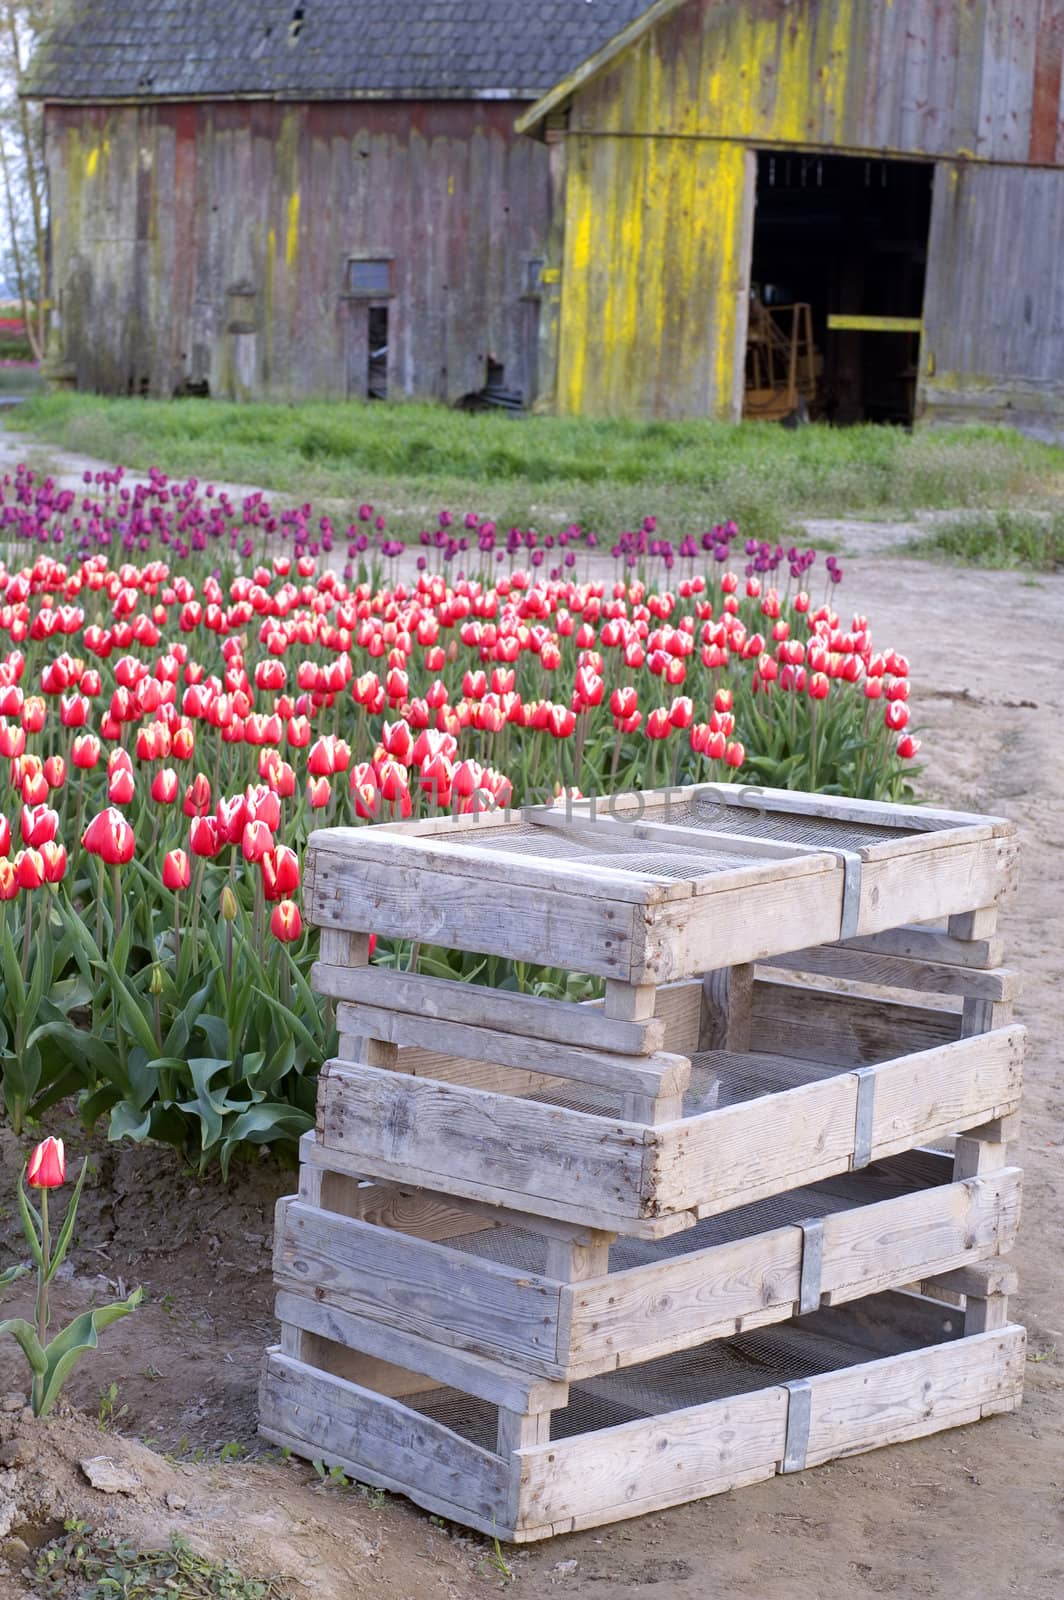 Buildings and equipment used in the production of Tulips wait to be used in the field